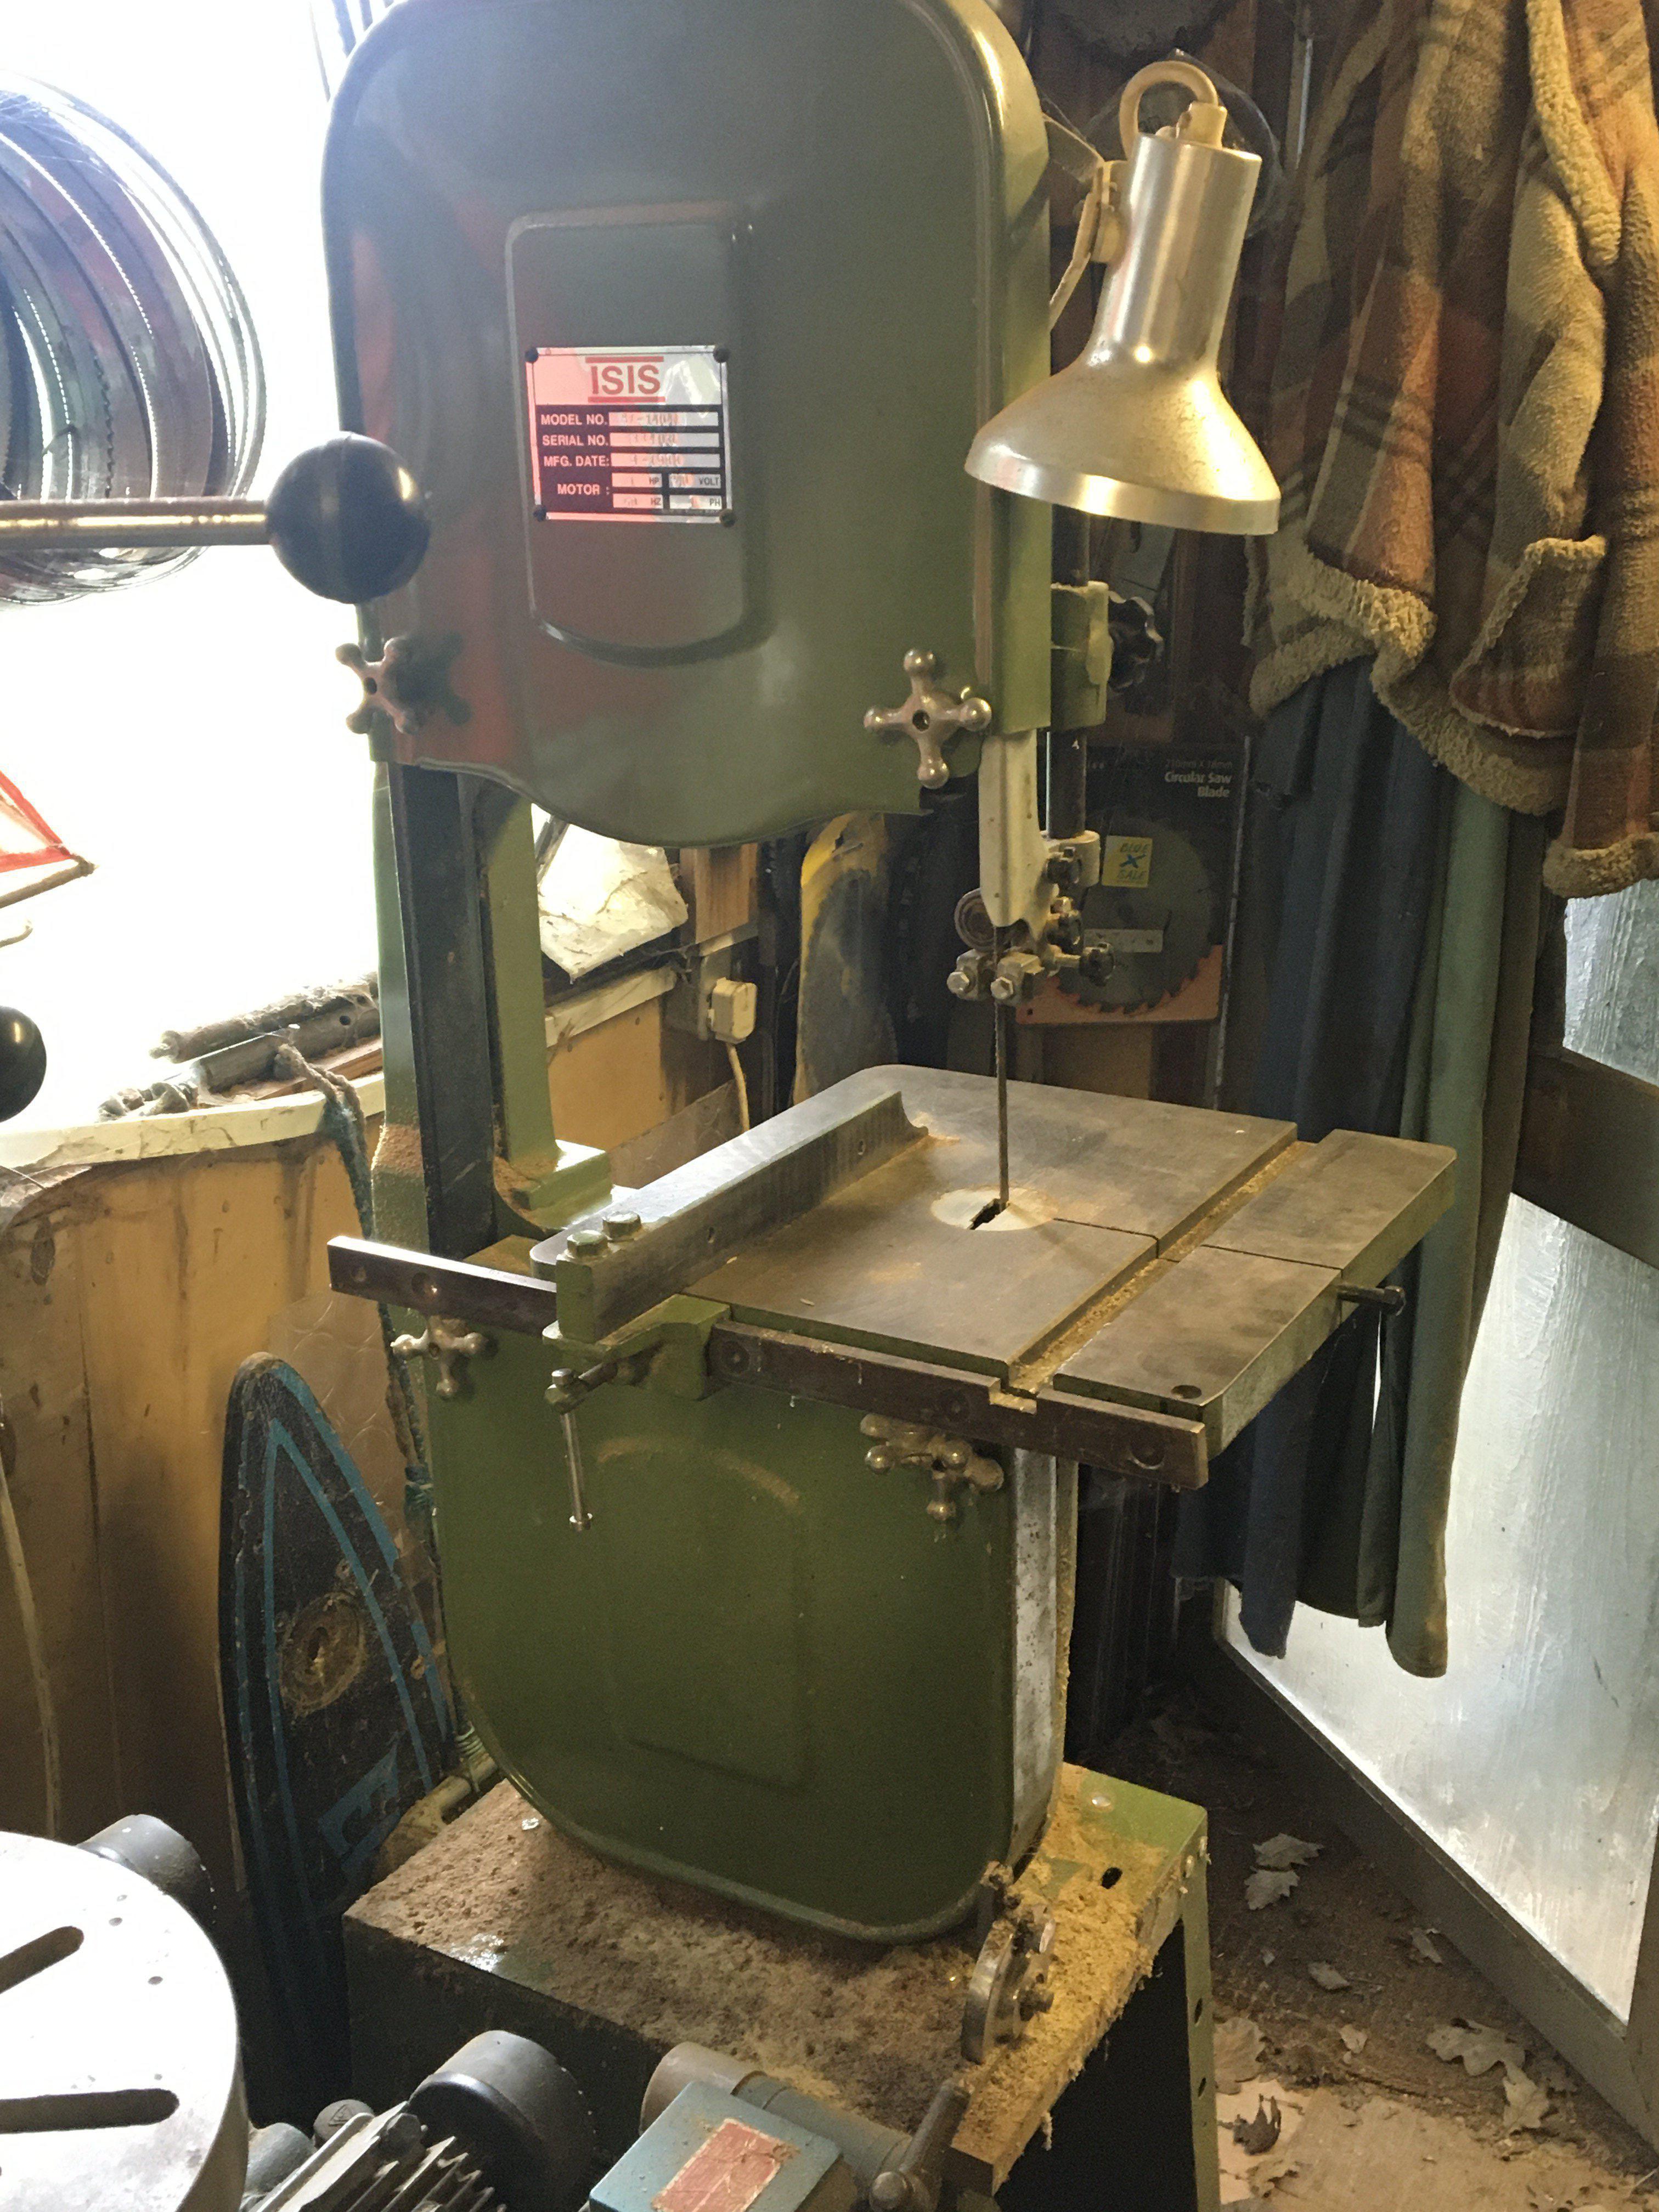 An Isis Single phase electric bandsaw